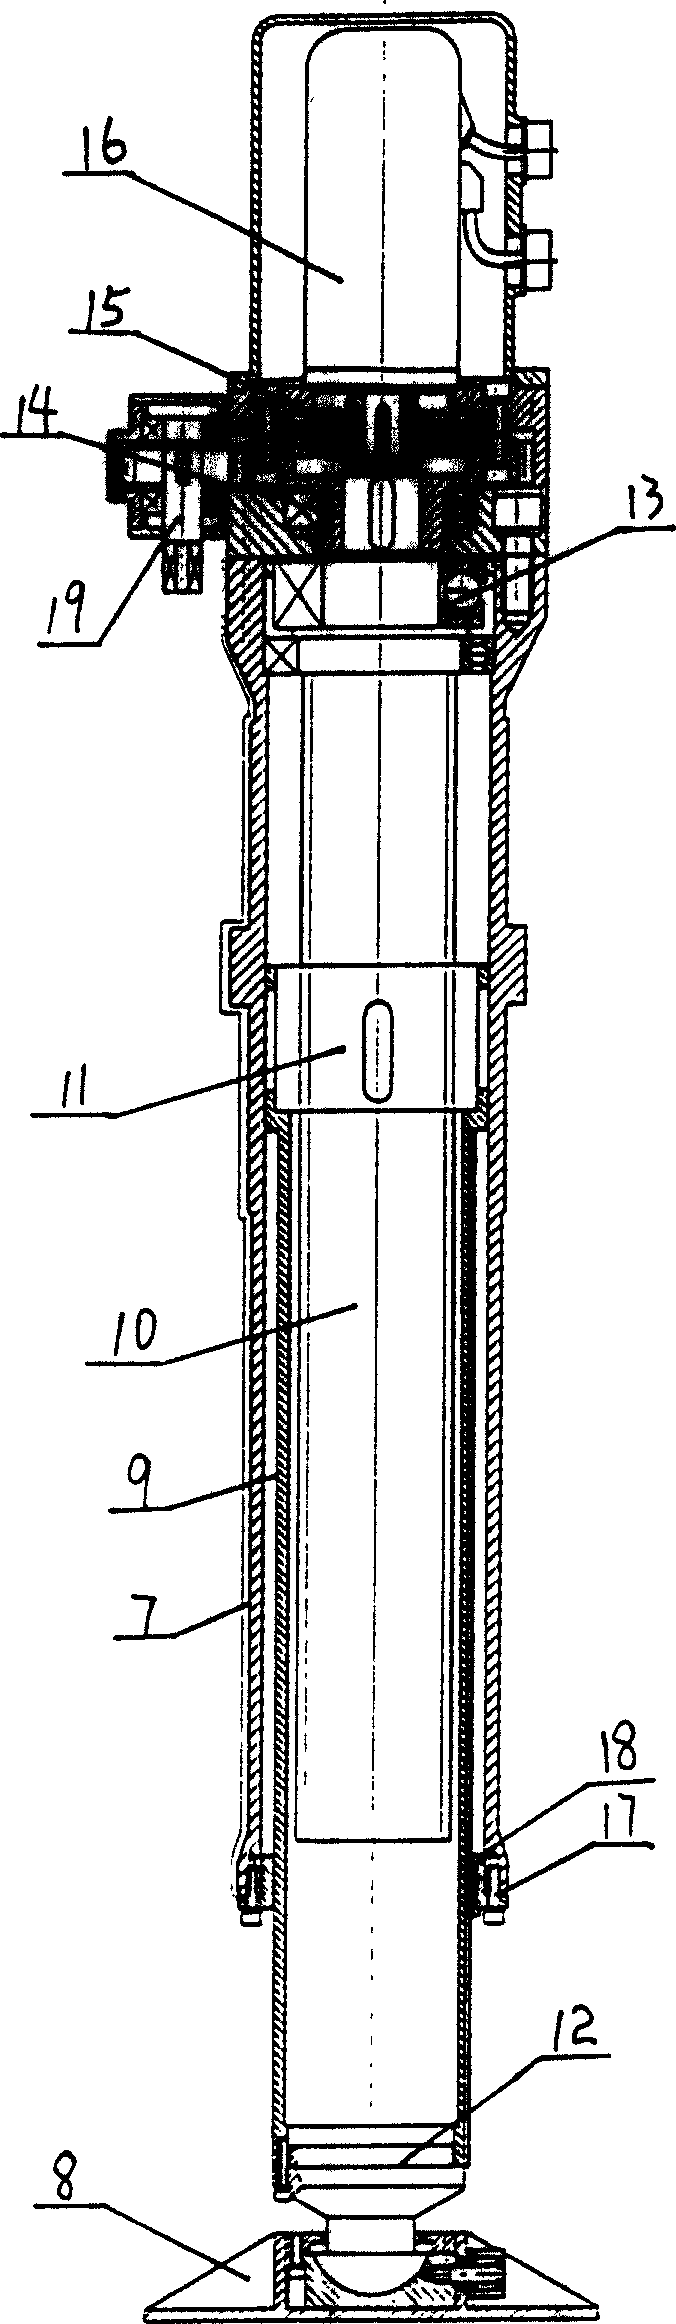 Ground mobile working platform for electronic device